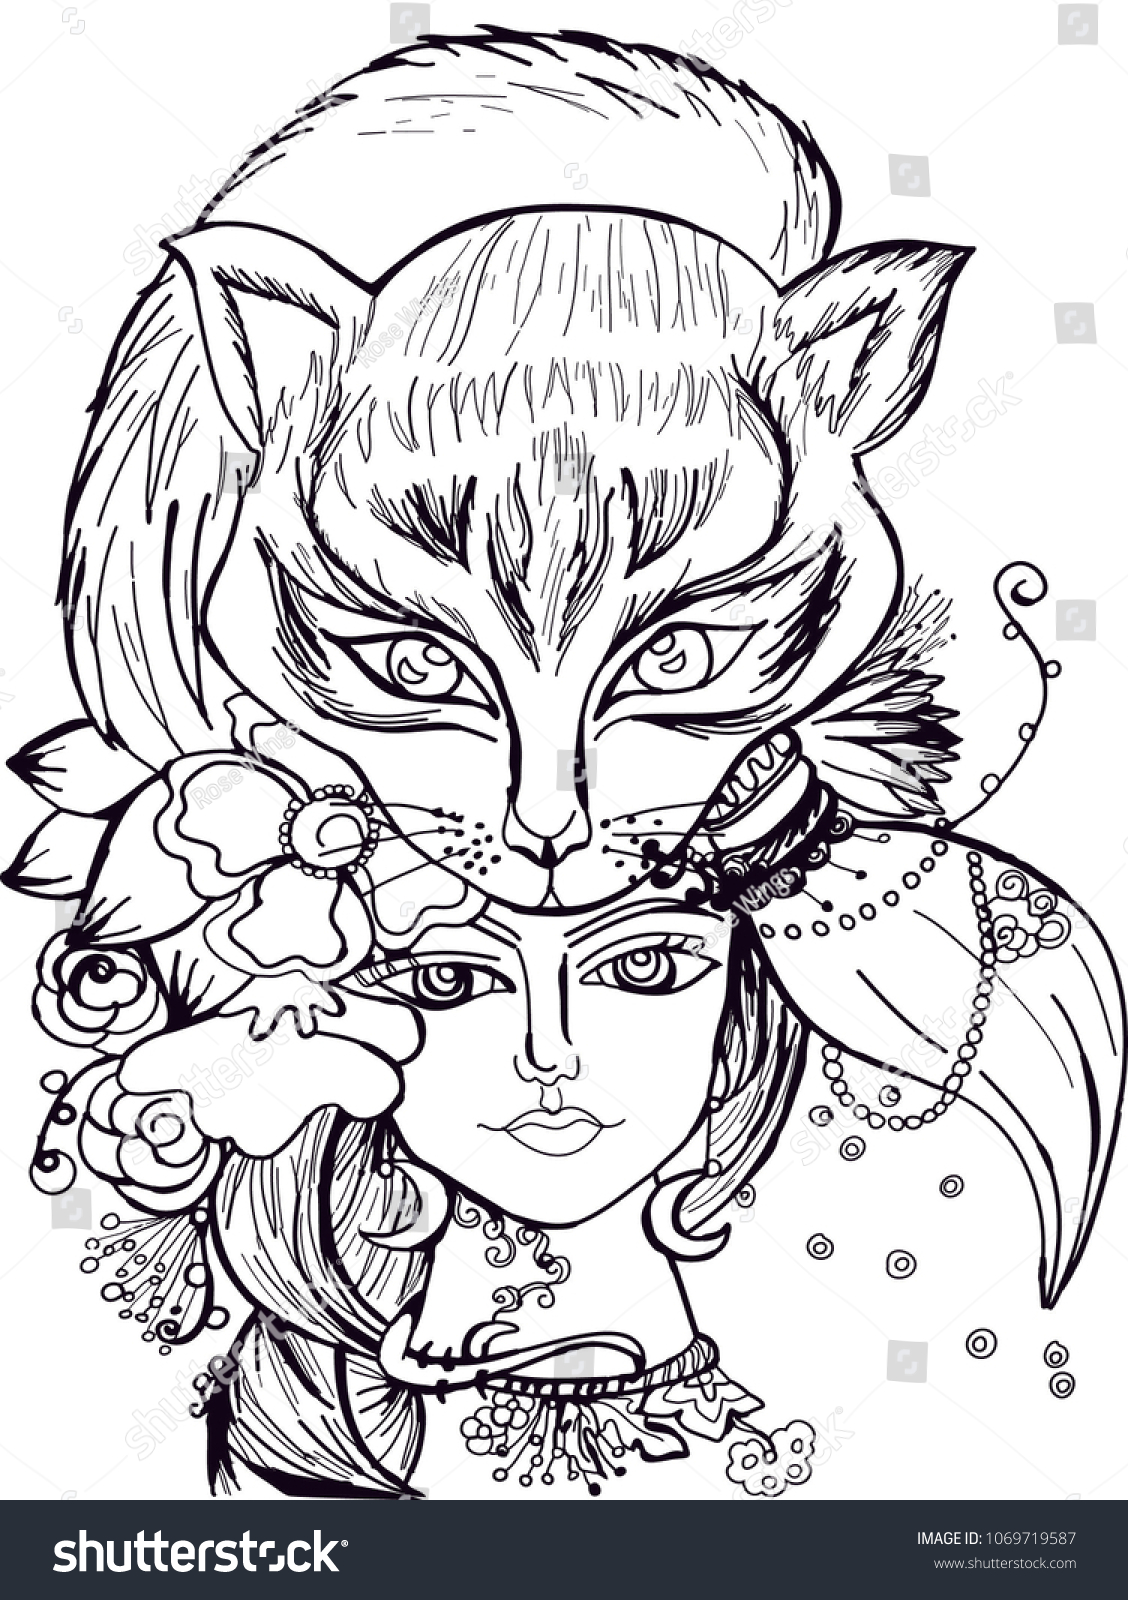 Girl Animal Flowers Illustration Coloring Pages Stock Vector ...